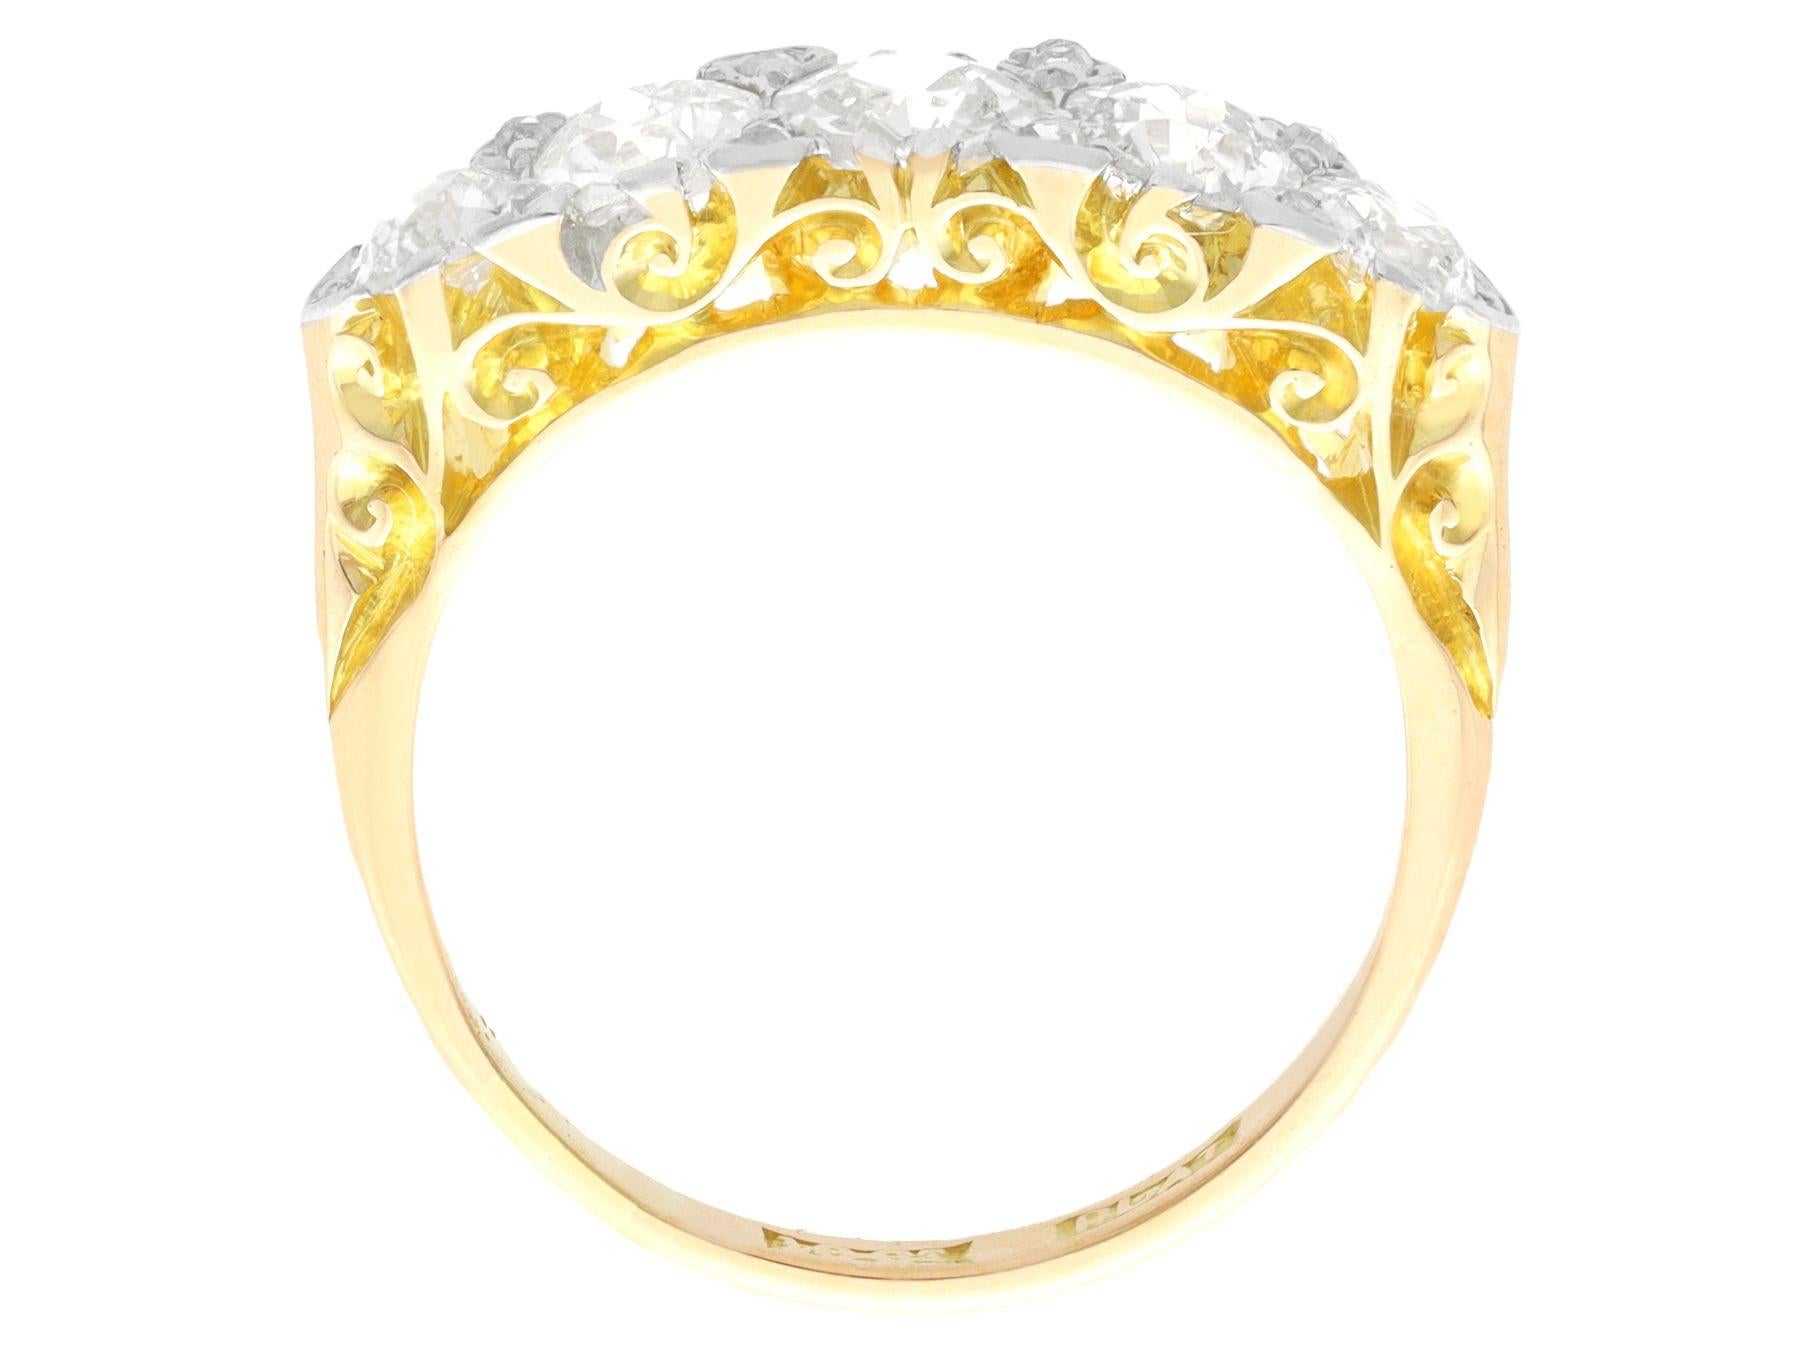 Women's or Men's Antique 1.83 Carat Diamond and 18k Yellow Gold Dress Ring For Sale